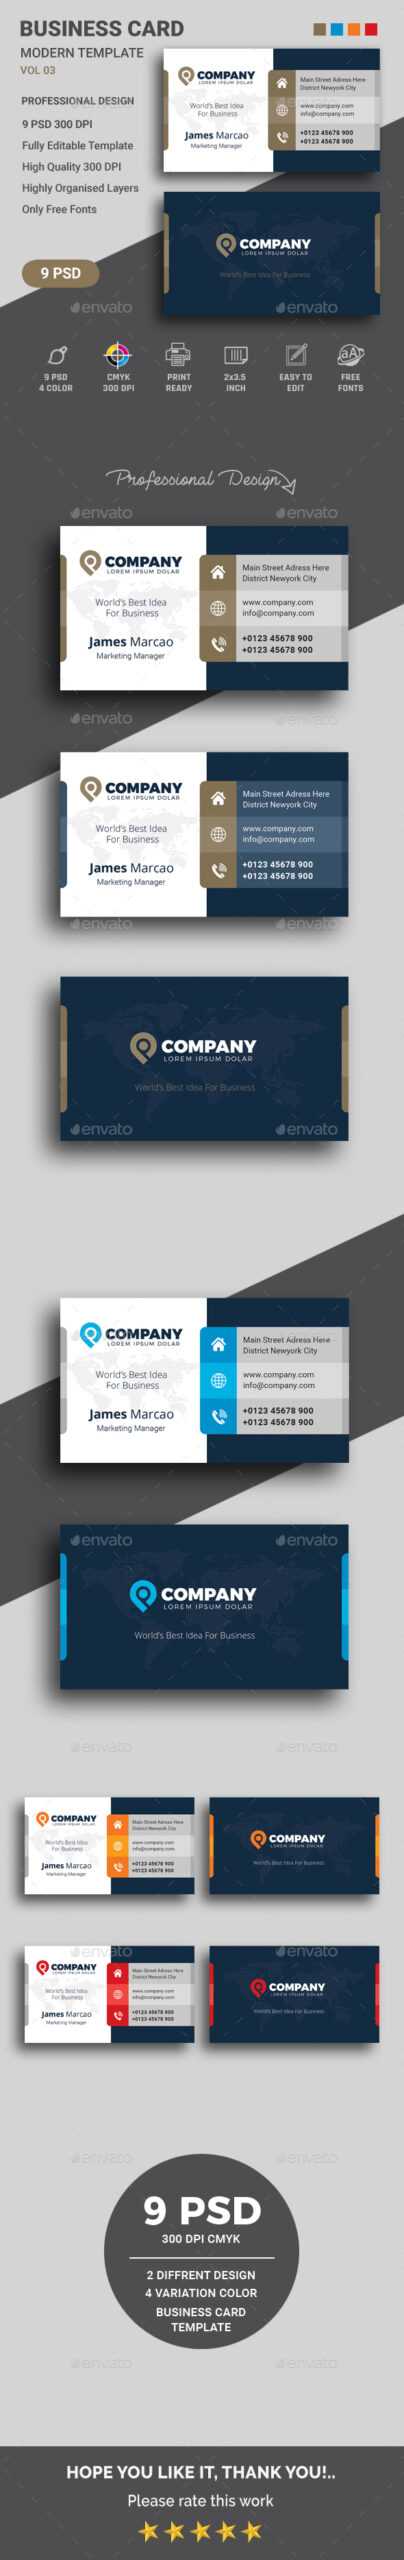 2020's Best Selling Business Card Templates & Designs Pertaining To Business Card Maker Template